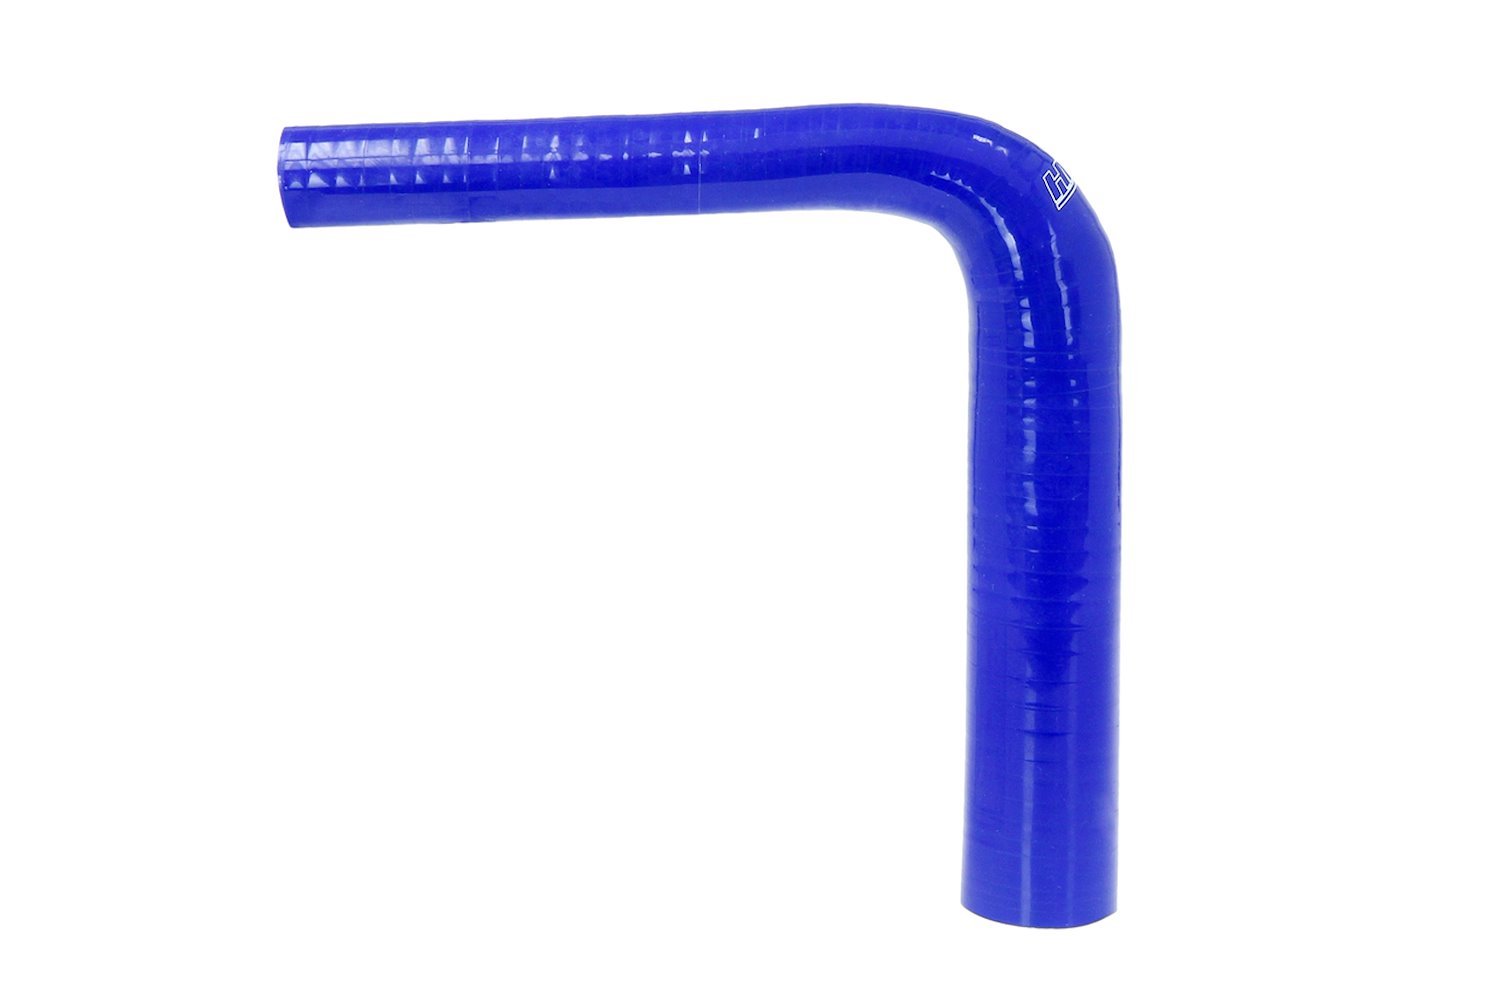 HTSER90-150-200-BLUE Silicone 90-Degree Elbow Hose, High-Temp 4-Ply Reinforced, 1-1/2 in. - 2 in. ID, Blue